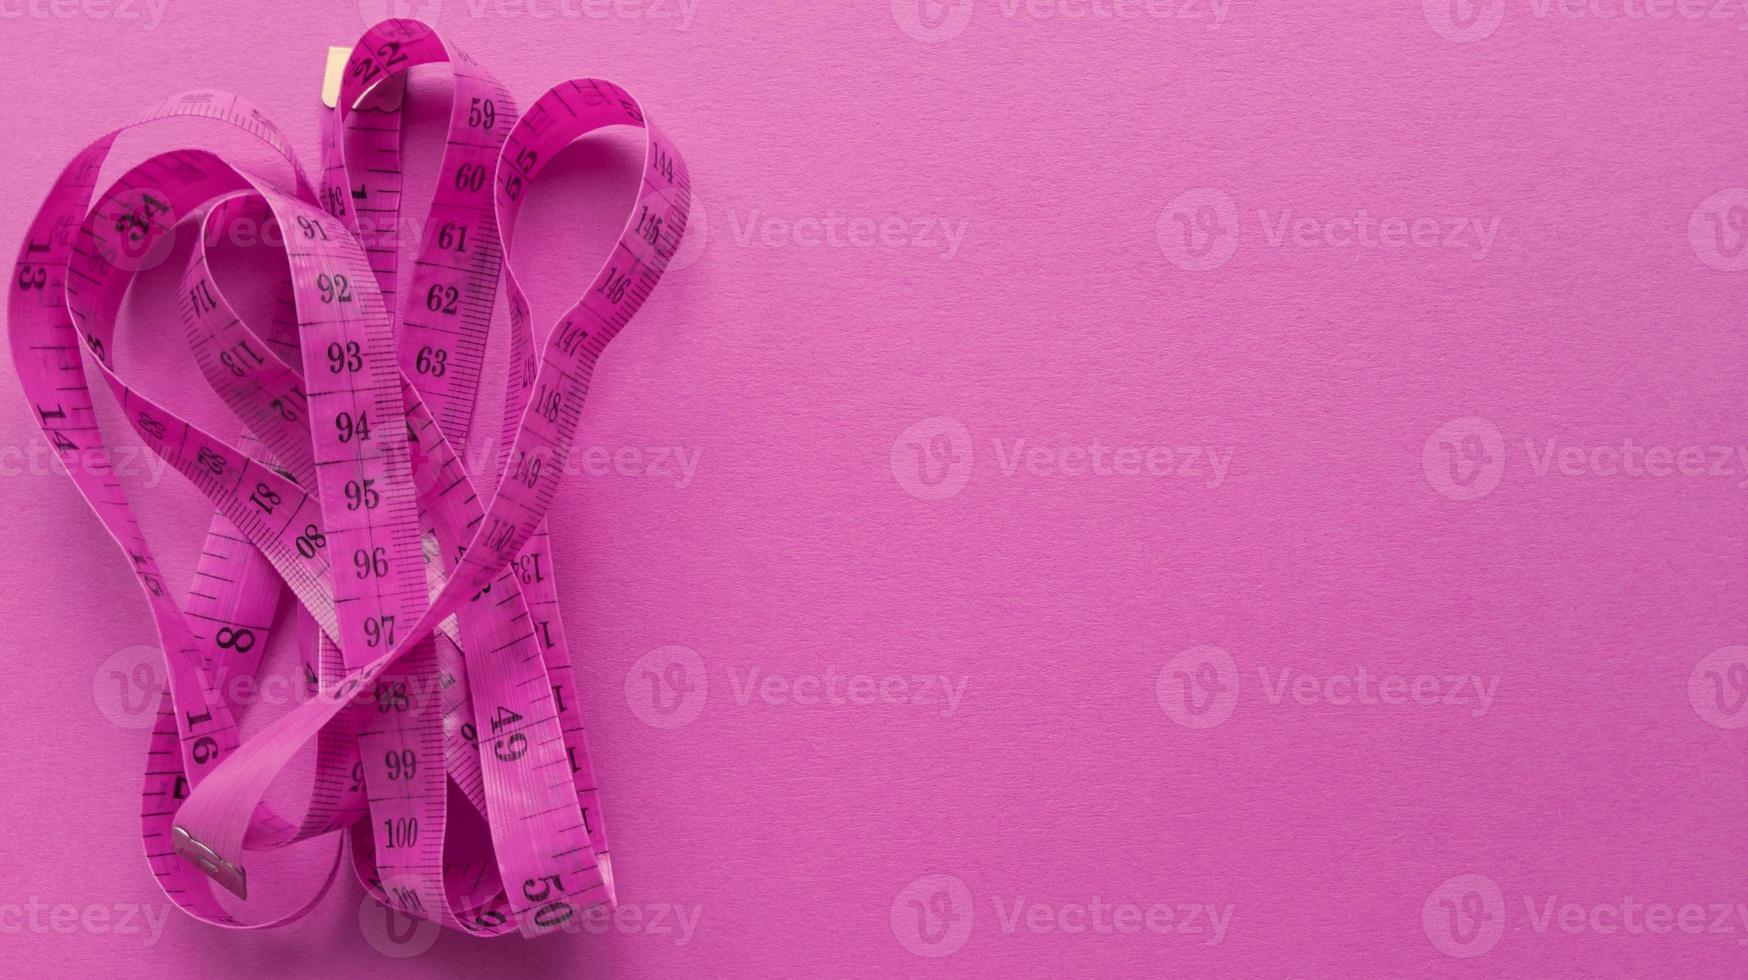 Pink centimeter on pink background. Simple flat lay with pastel texture. Fitness concept. Stock photo. photo